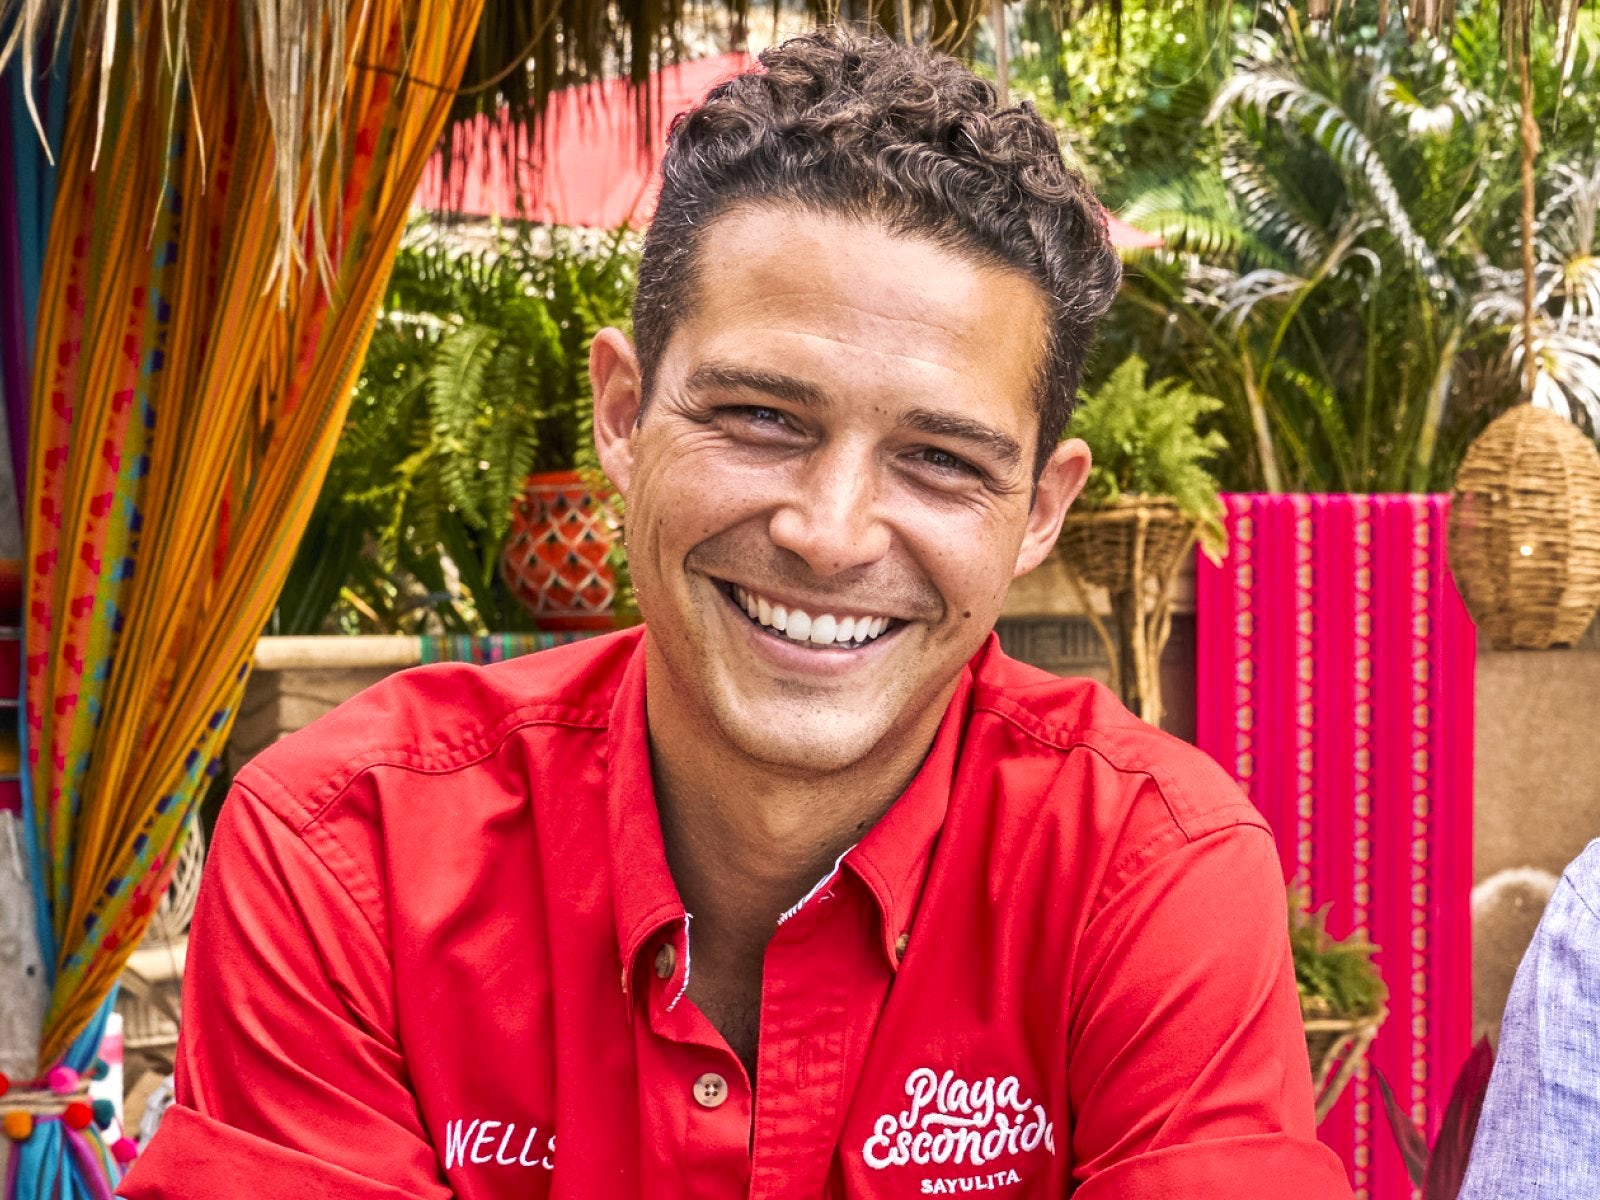 'Bachelor in Paradise' bartender Wells Adams The cast got "angry